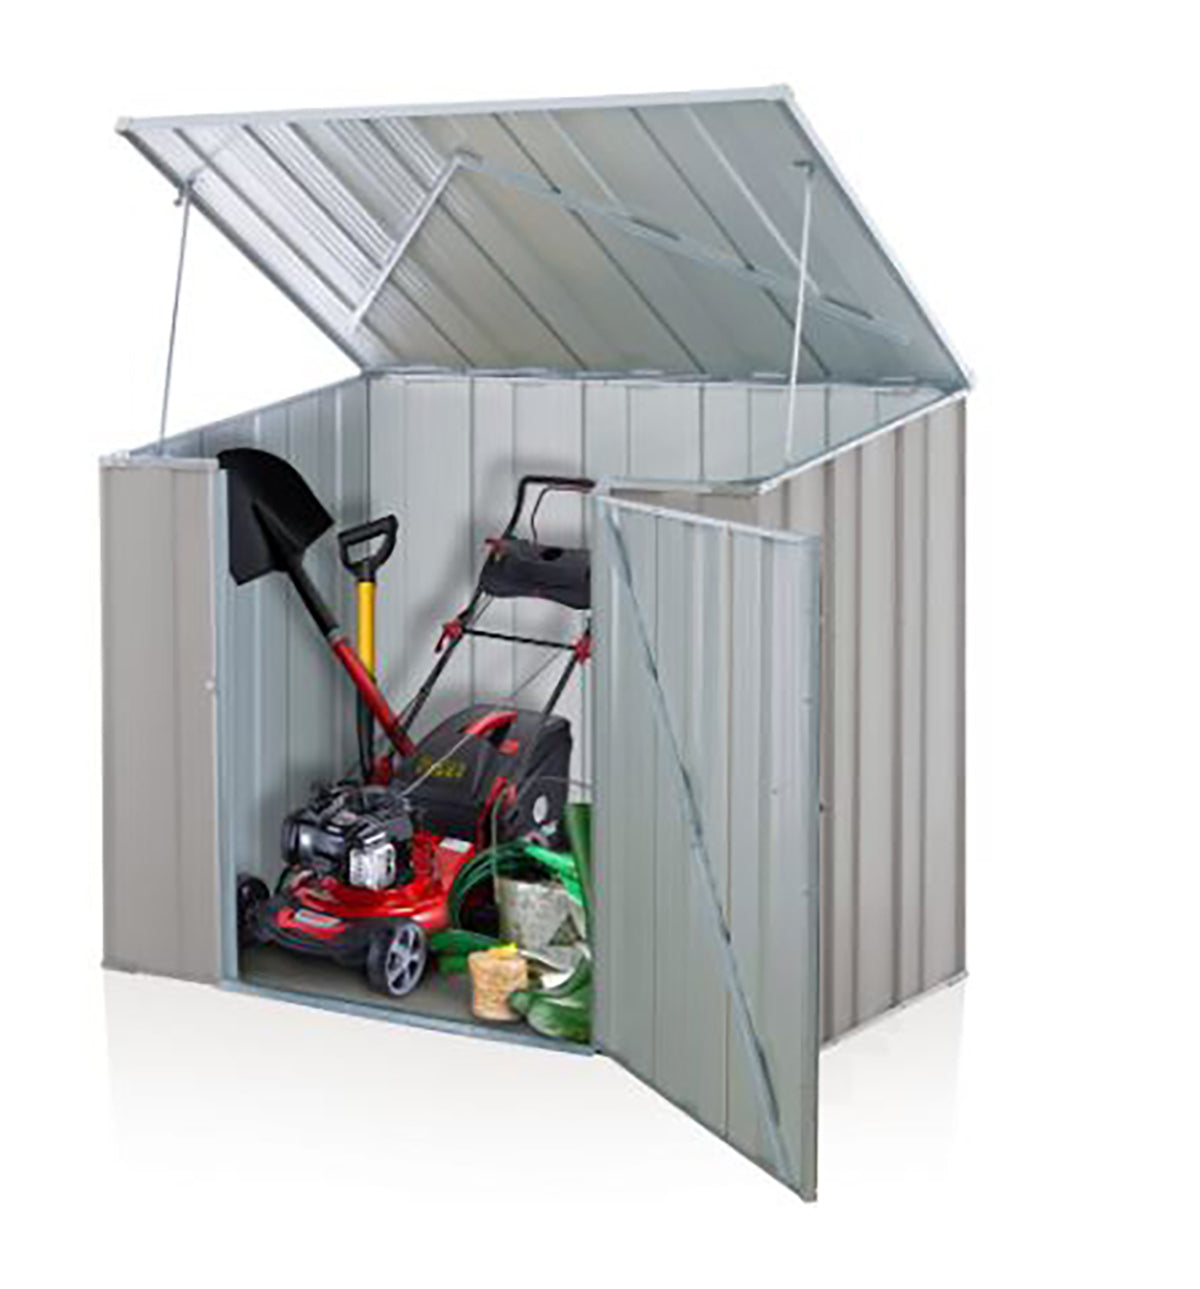 Large Silver Metal Storage Shed for Garden and Backyard